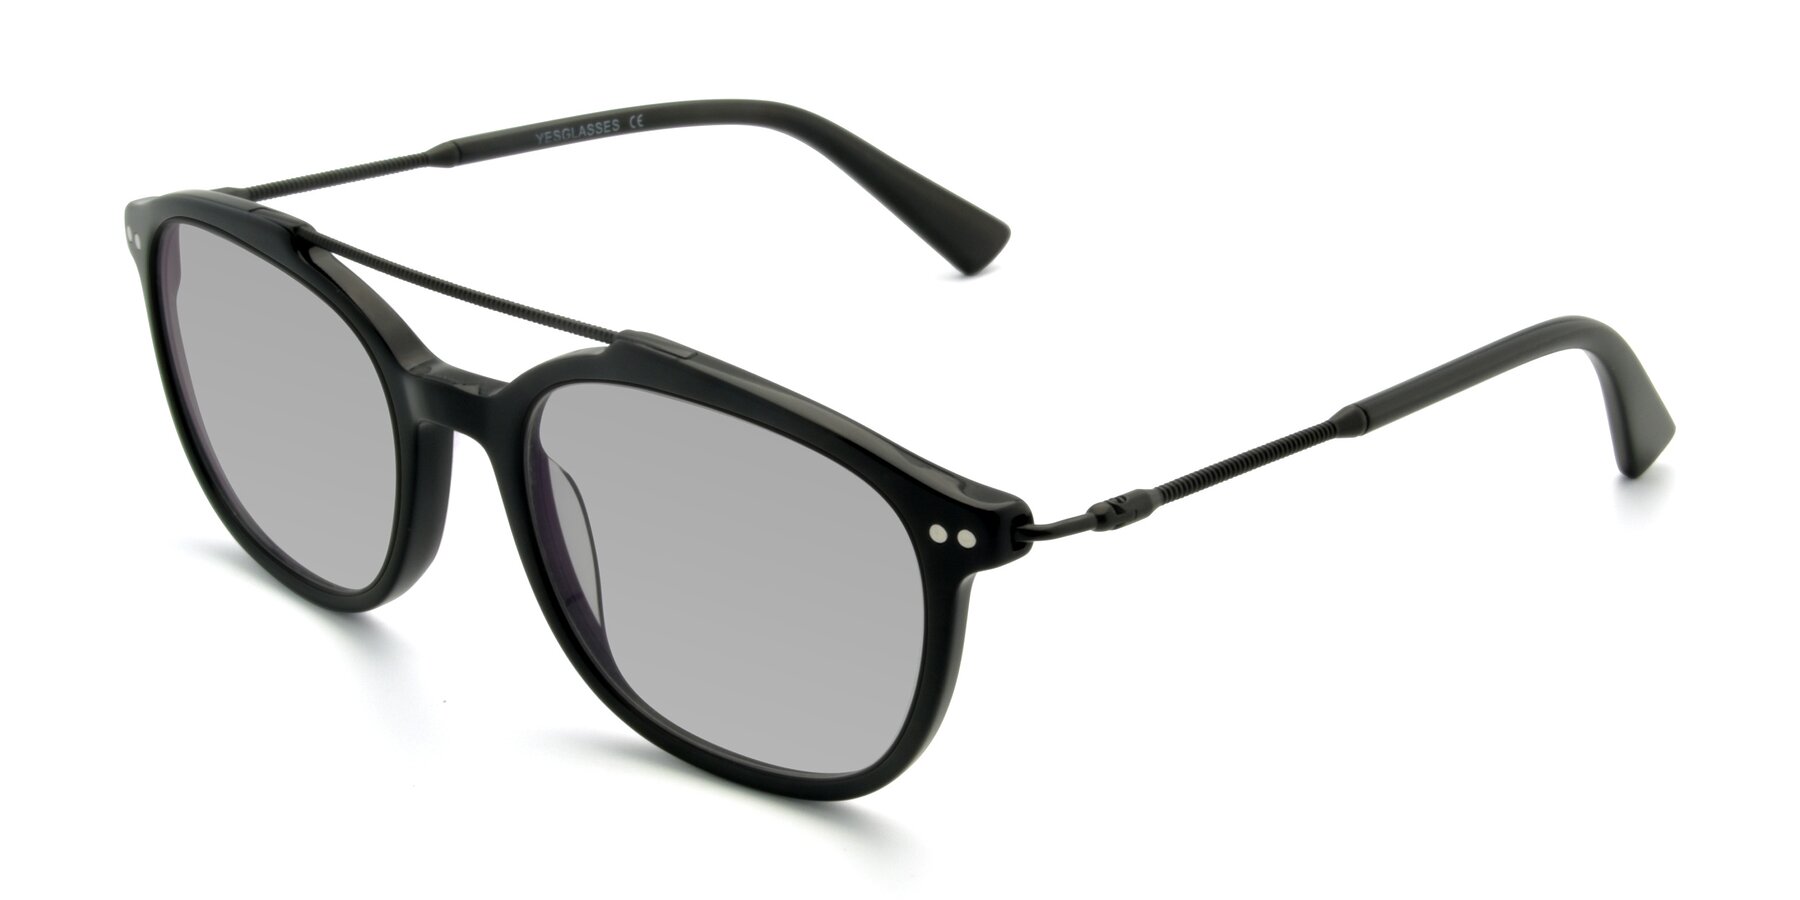 Angle of 17150 in Black with Light Gray Tinted Lenses